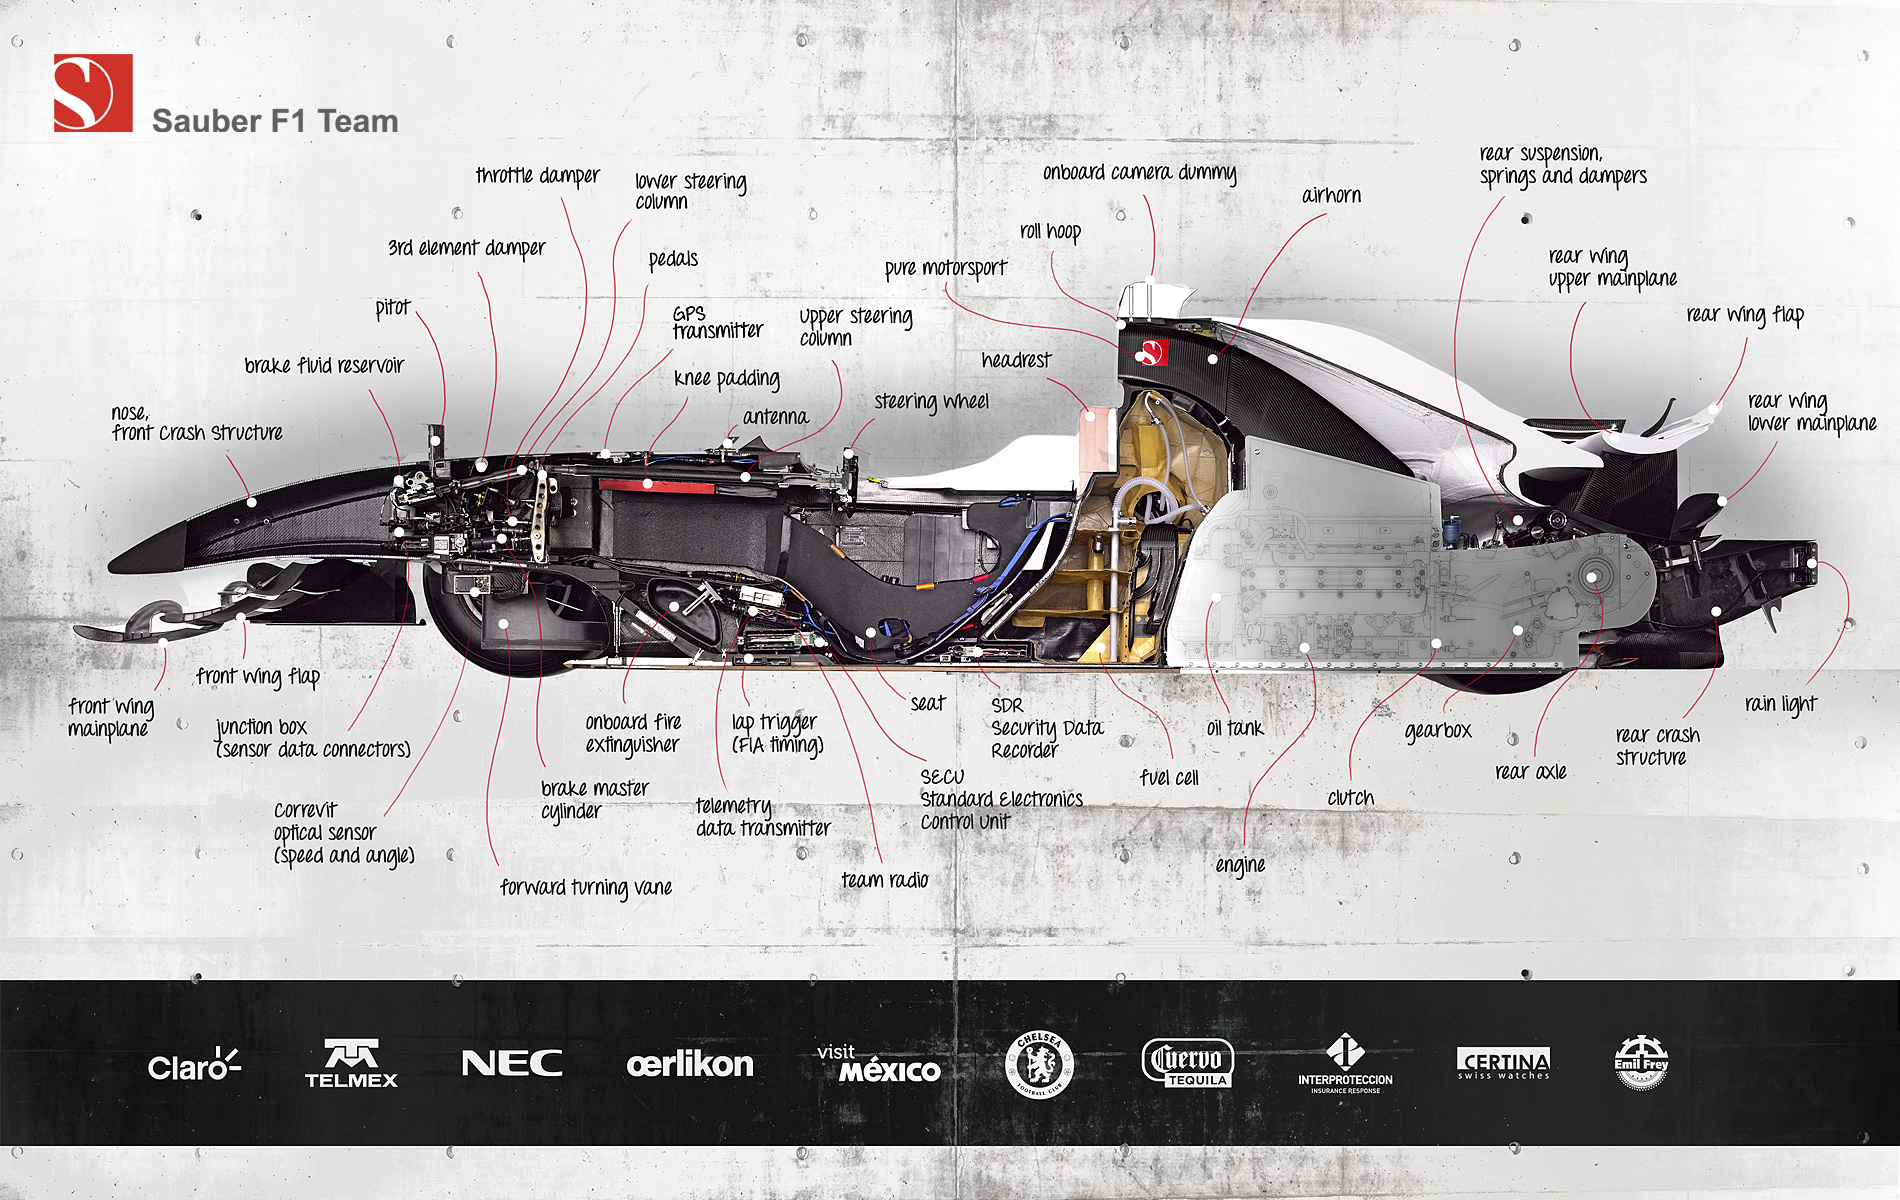 Sauber F1 Cutaway Image: All The Fastidious Details